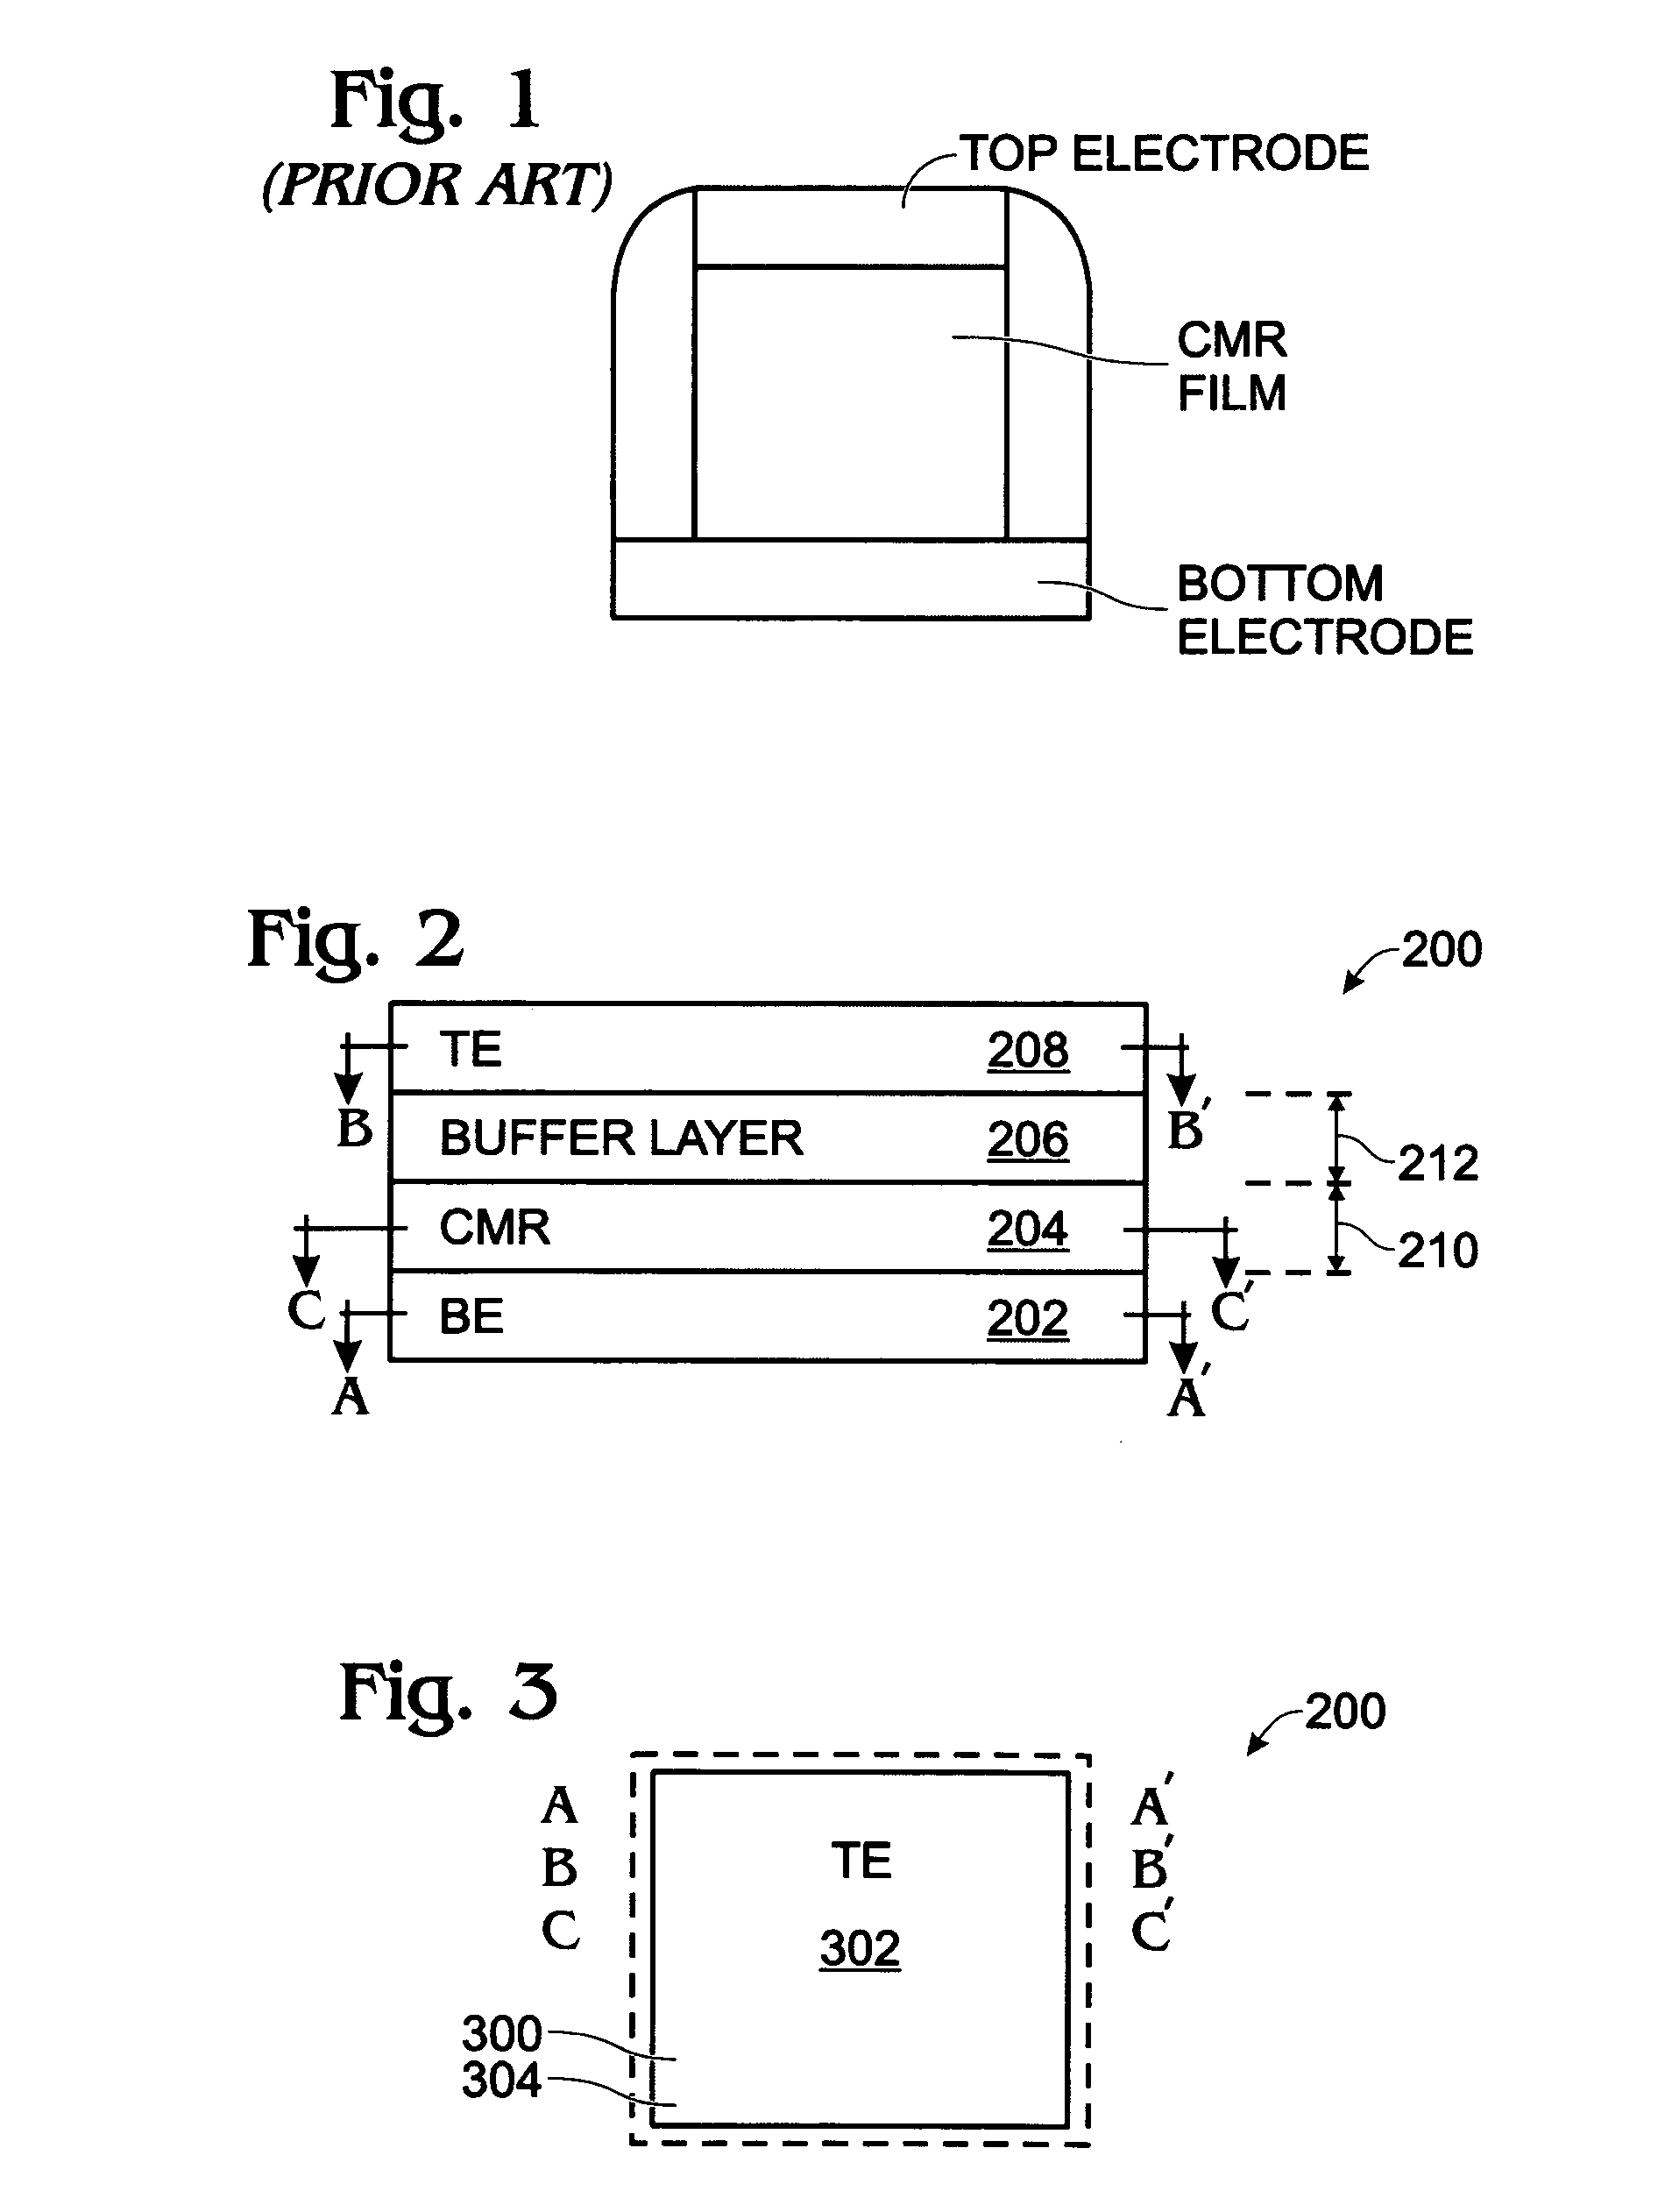 Memory cell with buffered layer